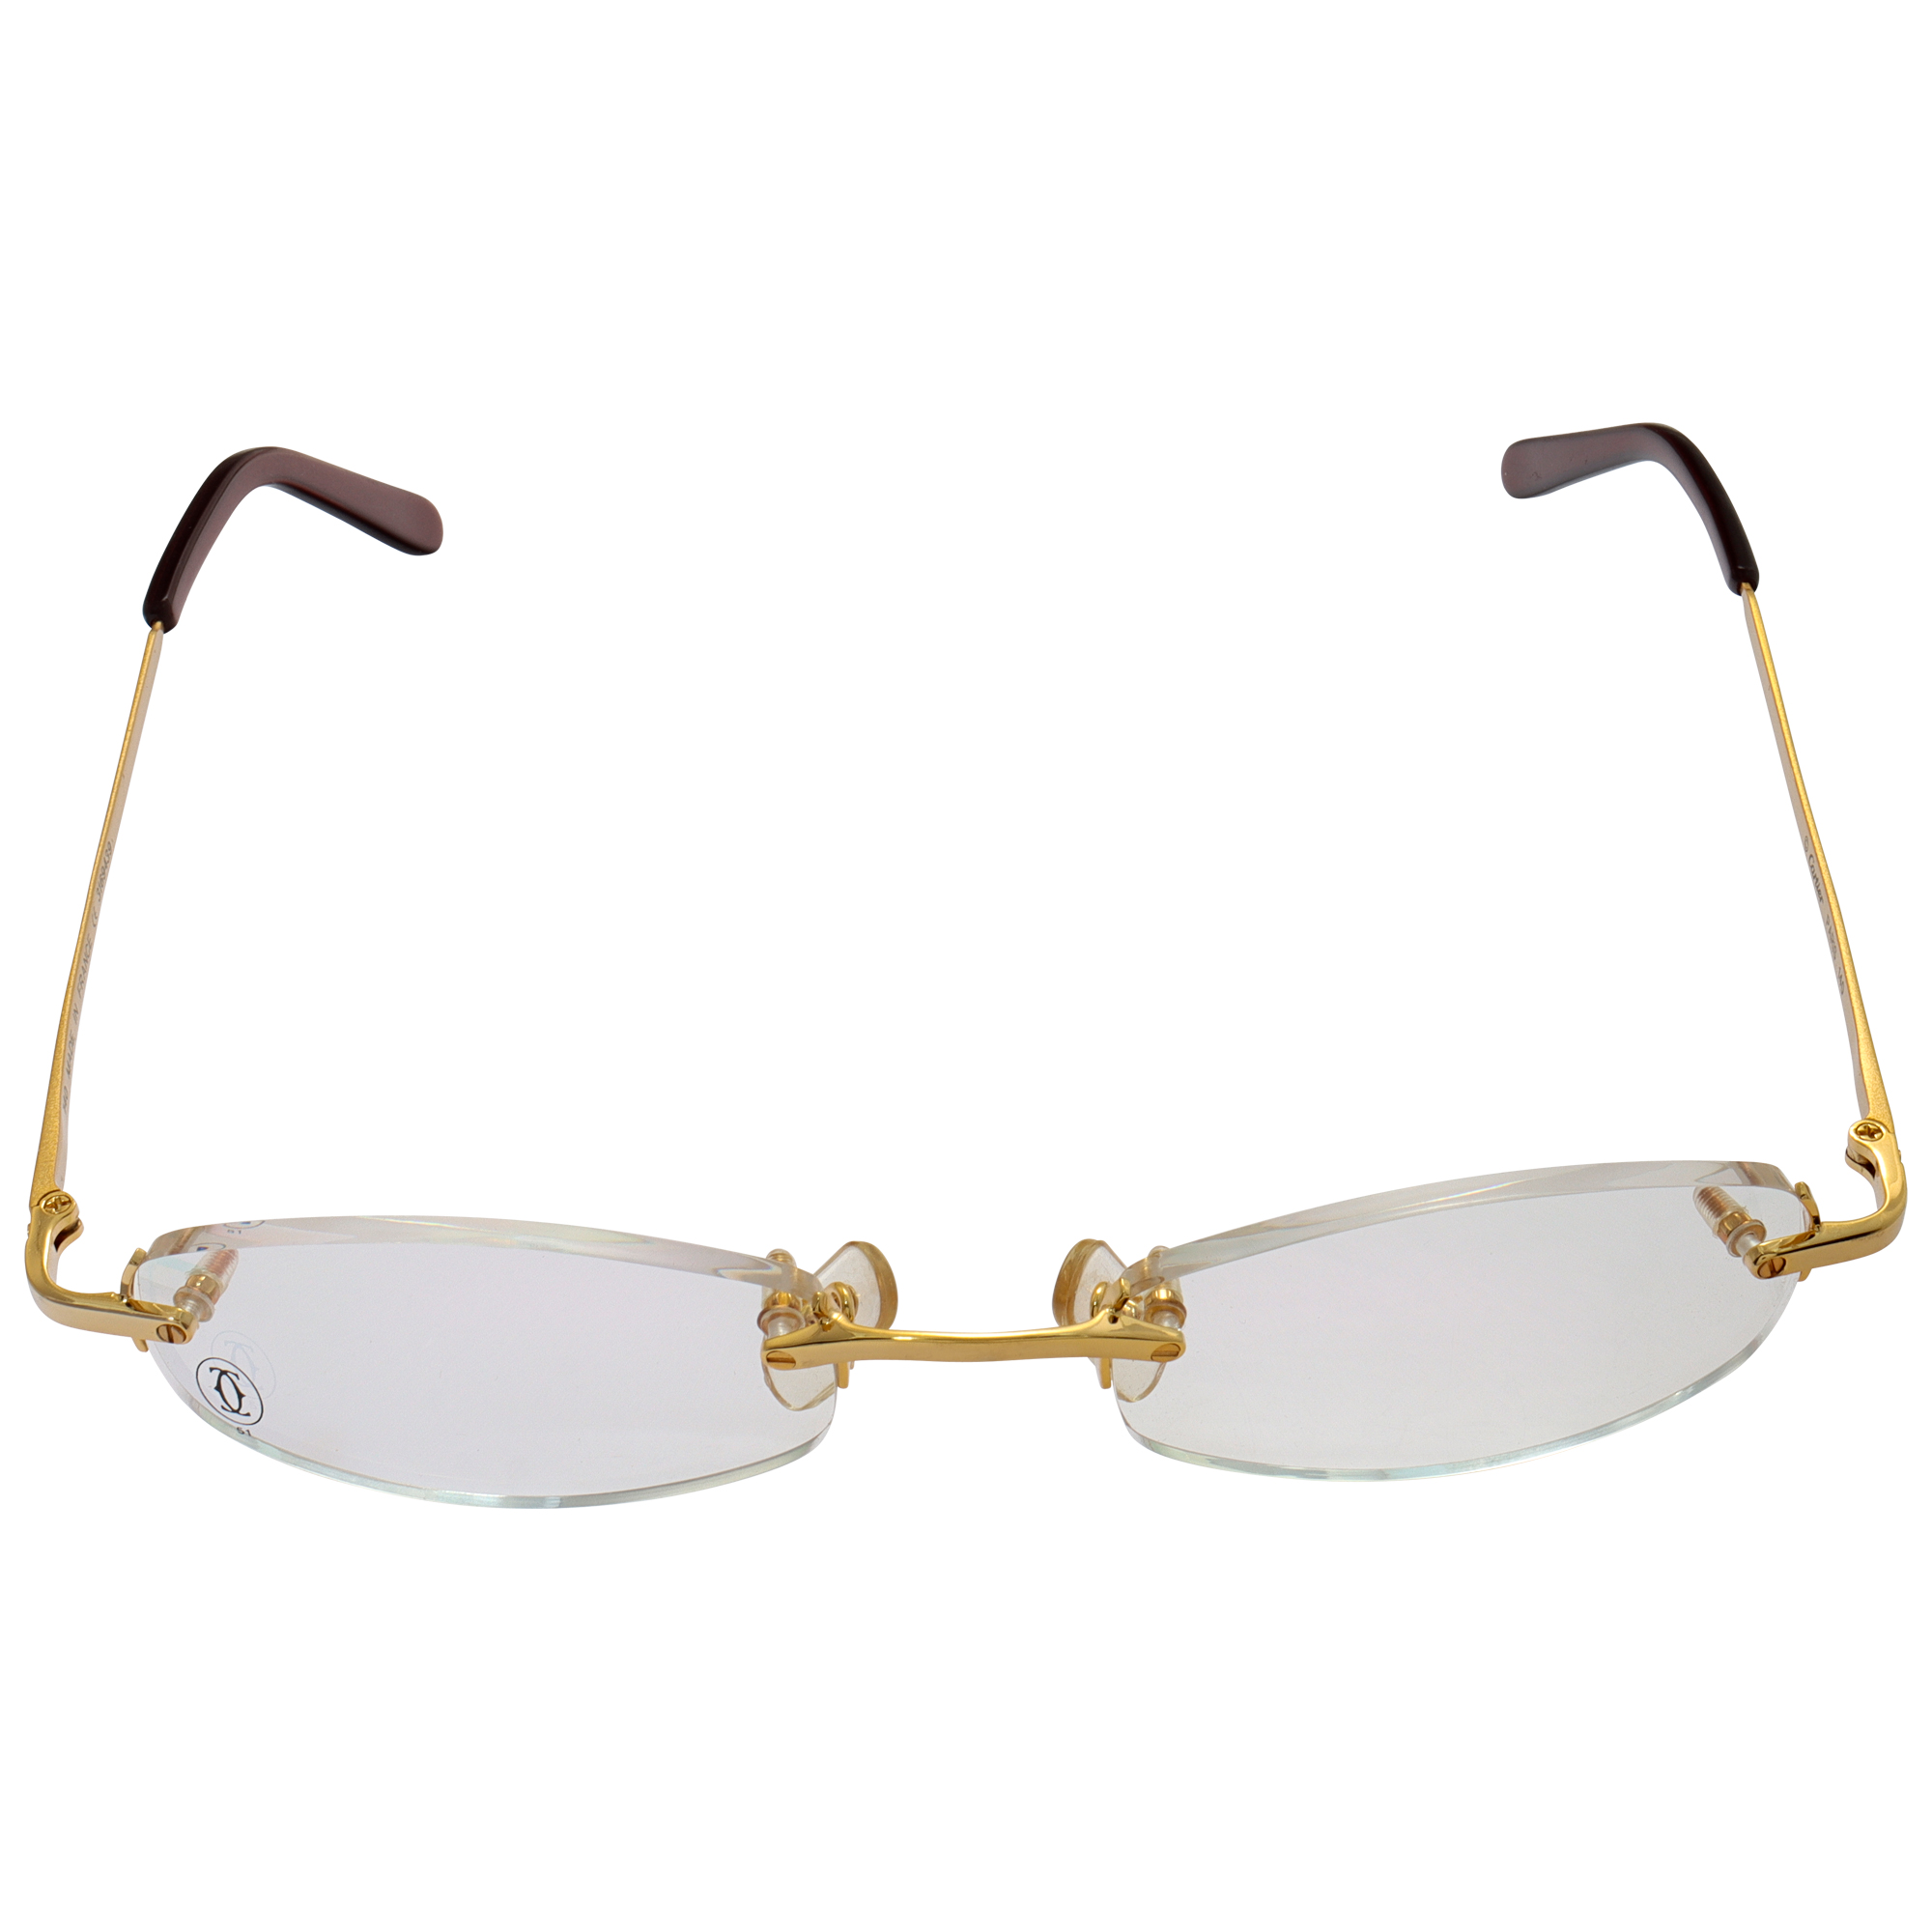 Cartier glasses with golden and red temples. Ref CE 3169439. Made in France. Comes with original Cartier presentation box